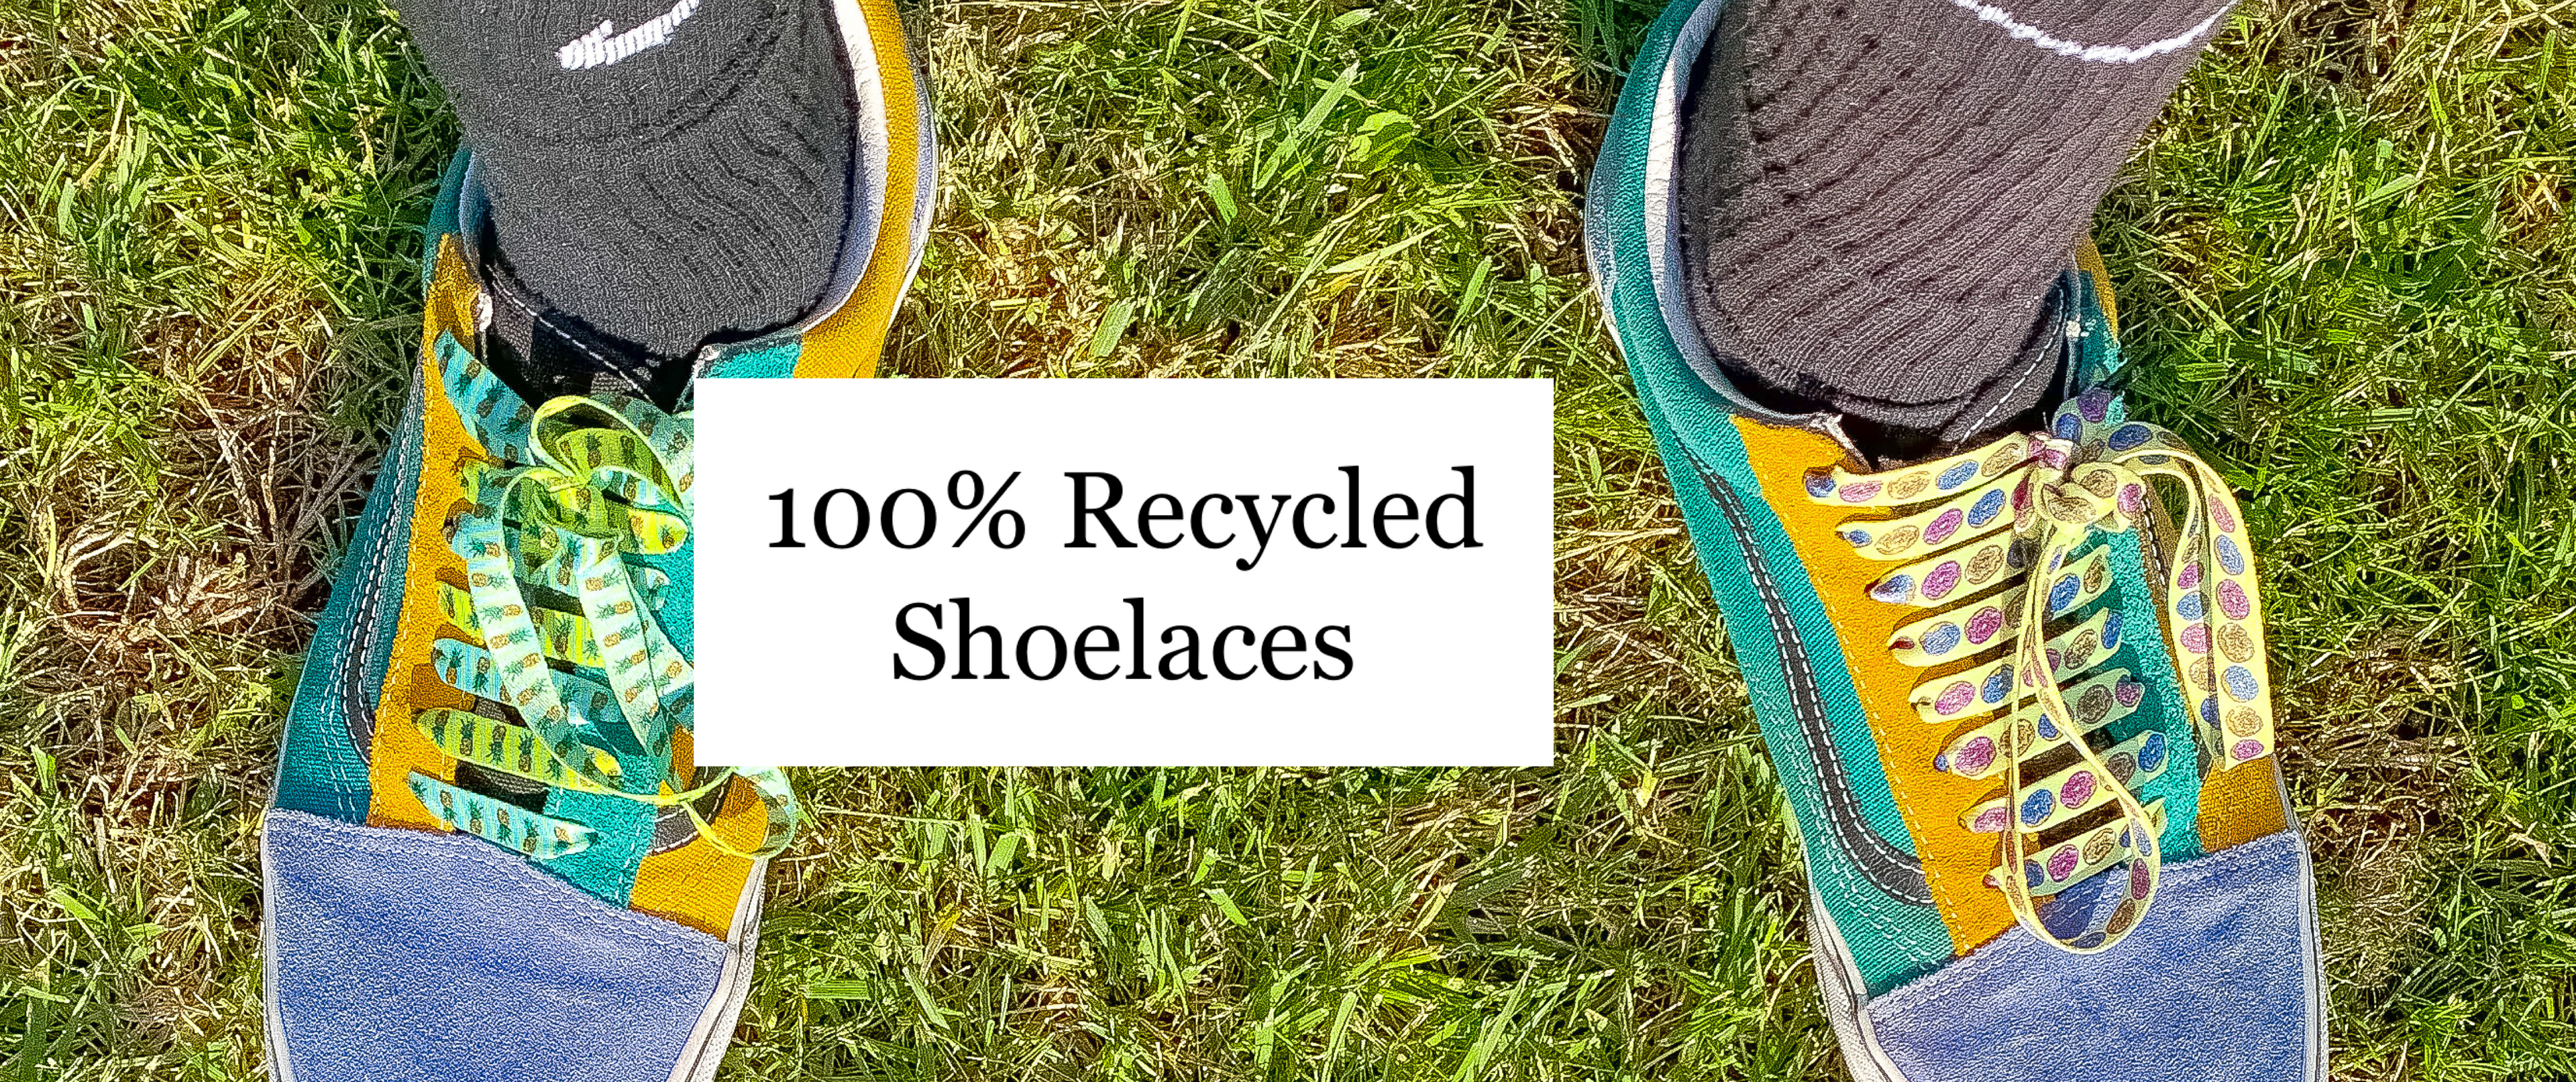 100% Recycled Shoelaces